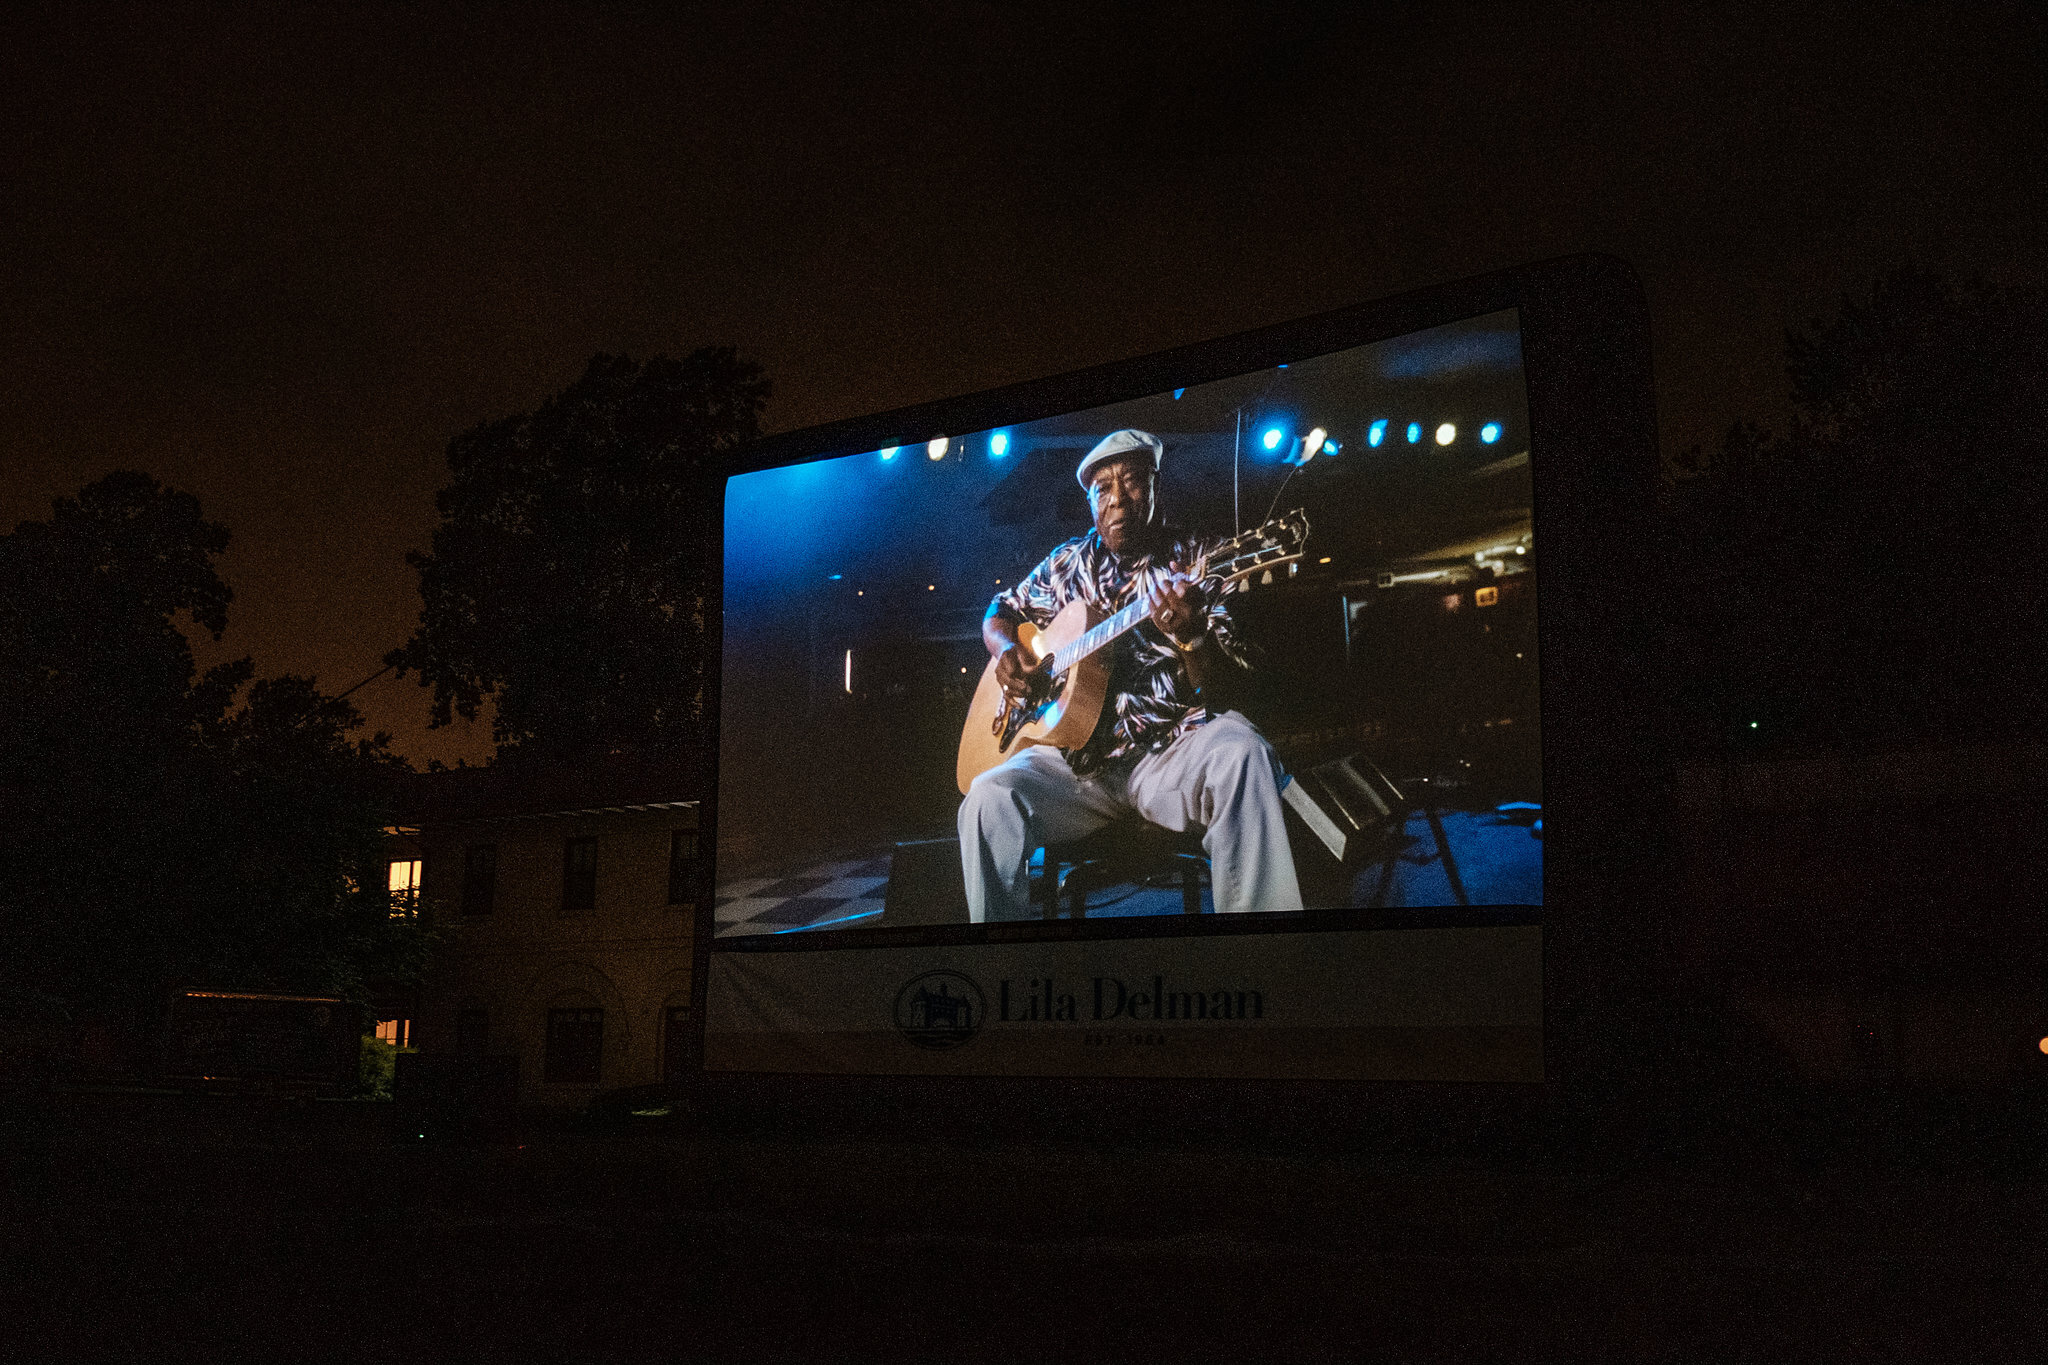  A screenshot of renowned Blues player Buddy Guy, during the outdoors screening of “Two Trains Runnin’”. 